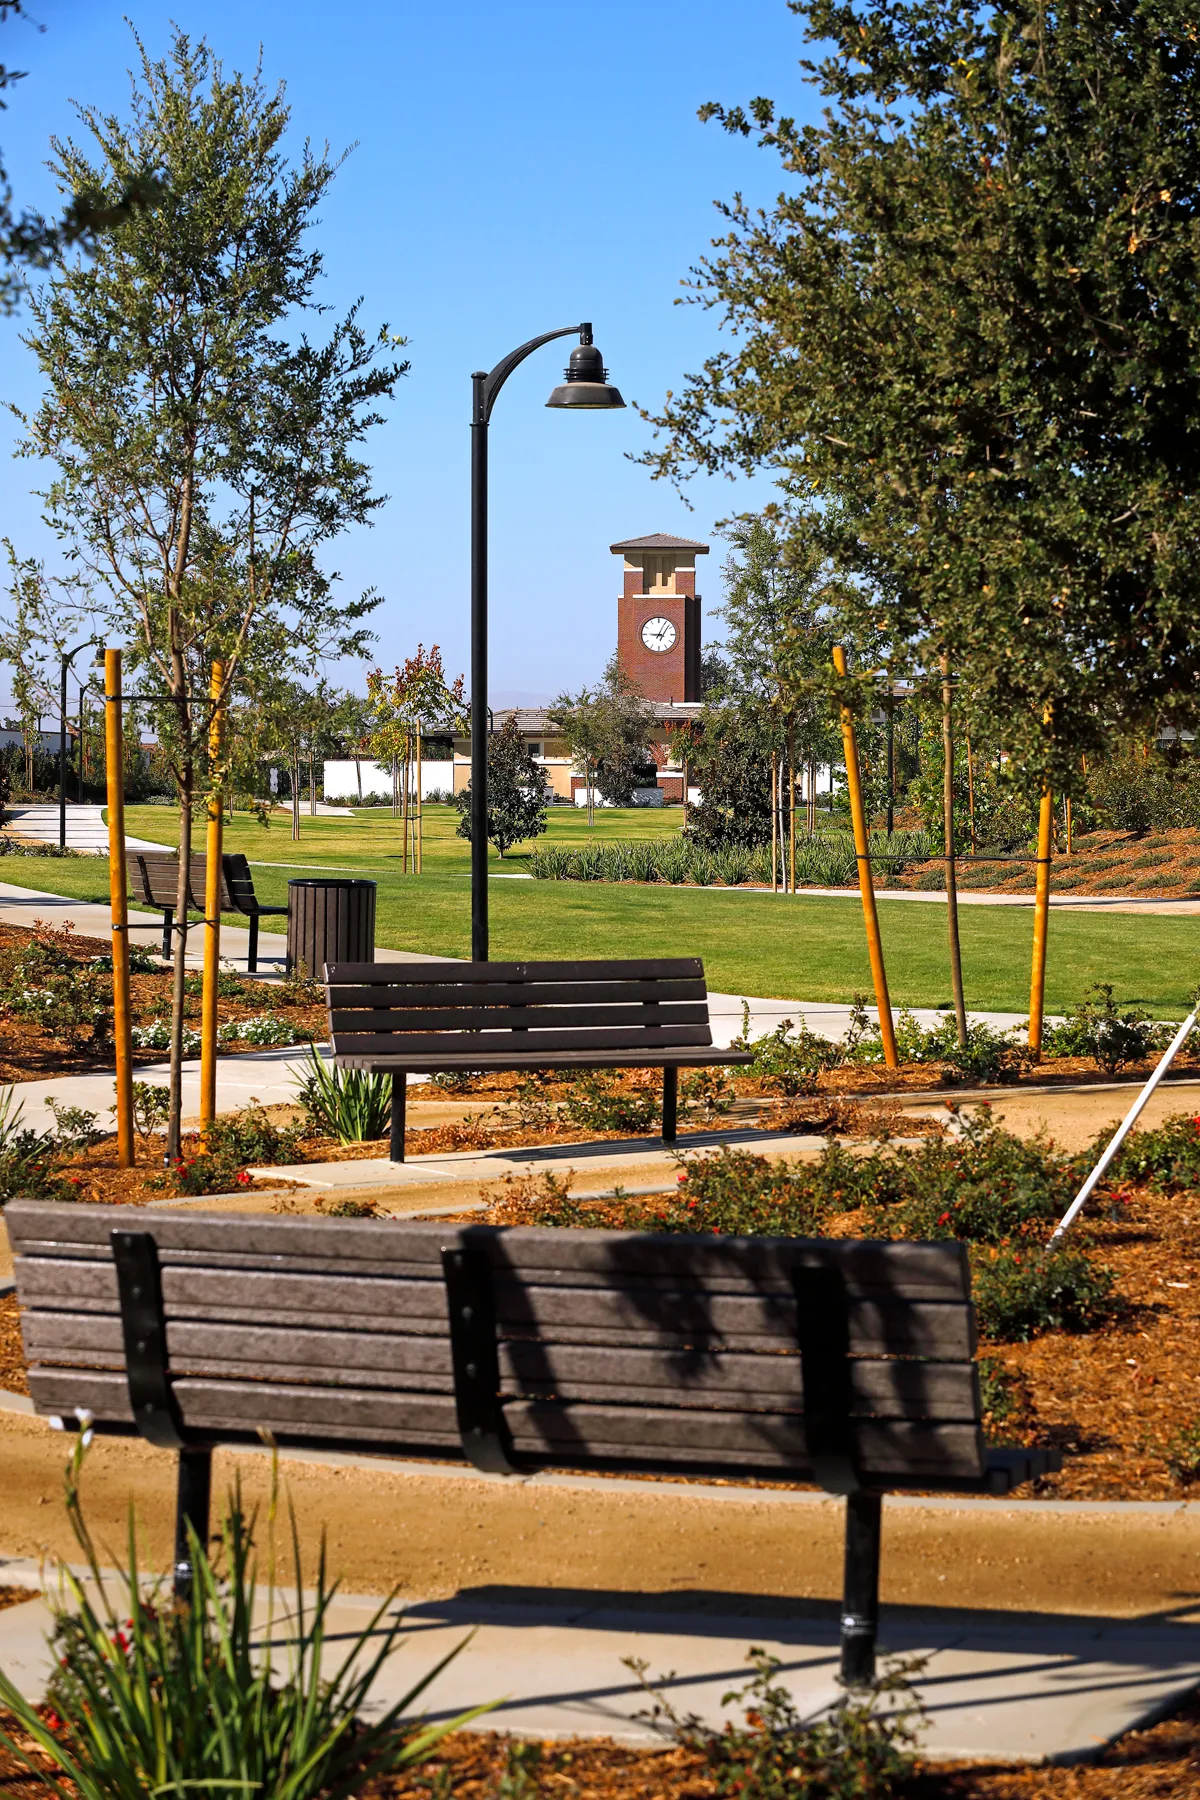 The Belcourt Promenade and Trail System